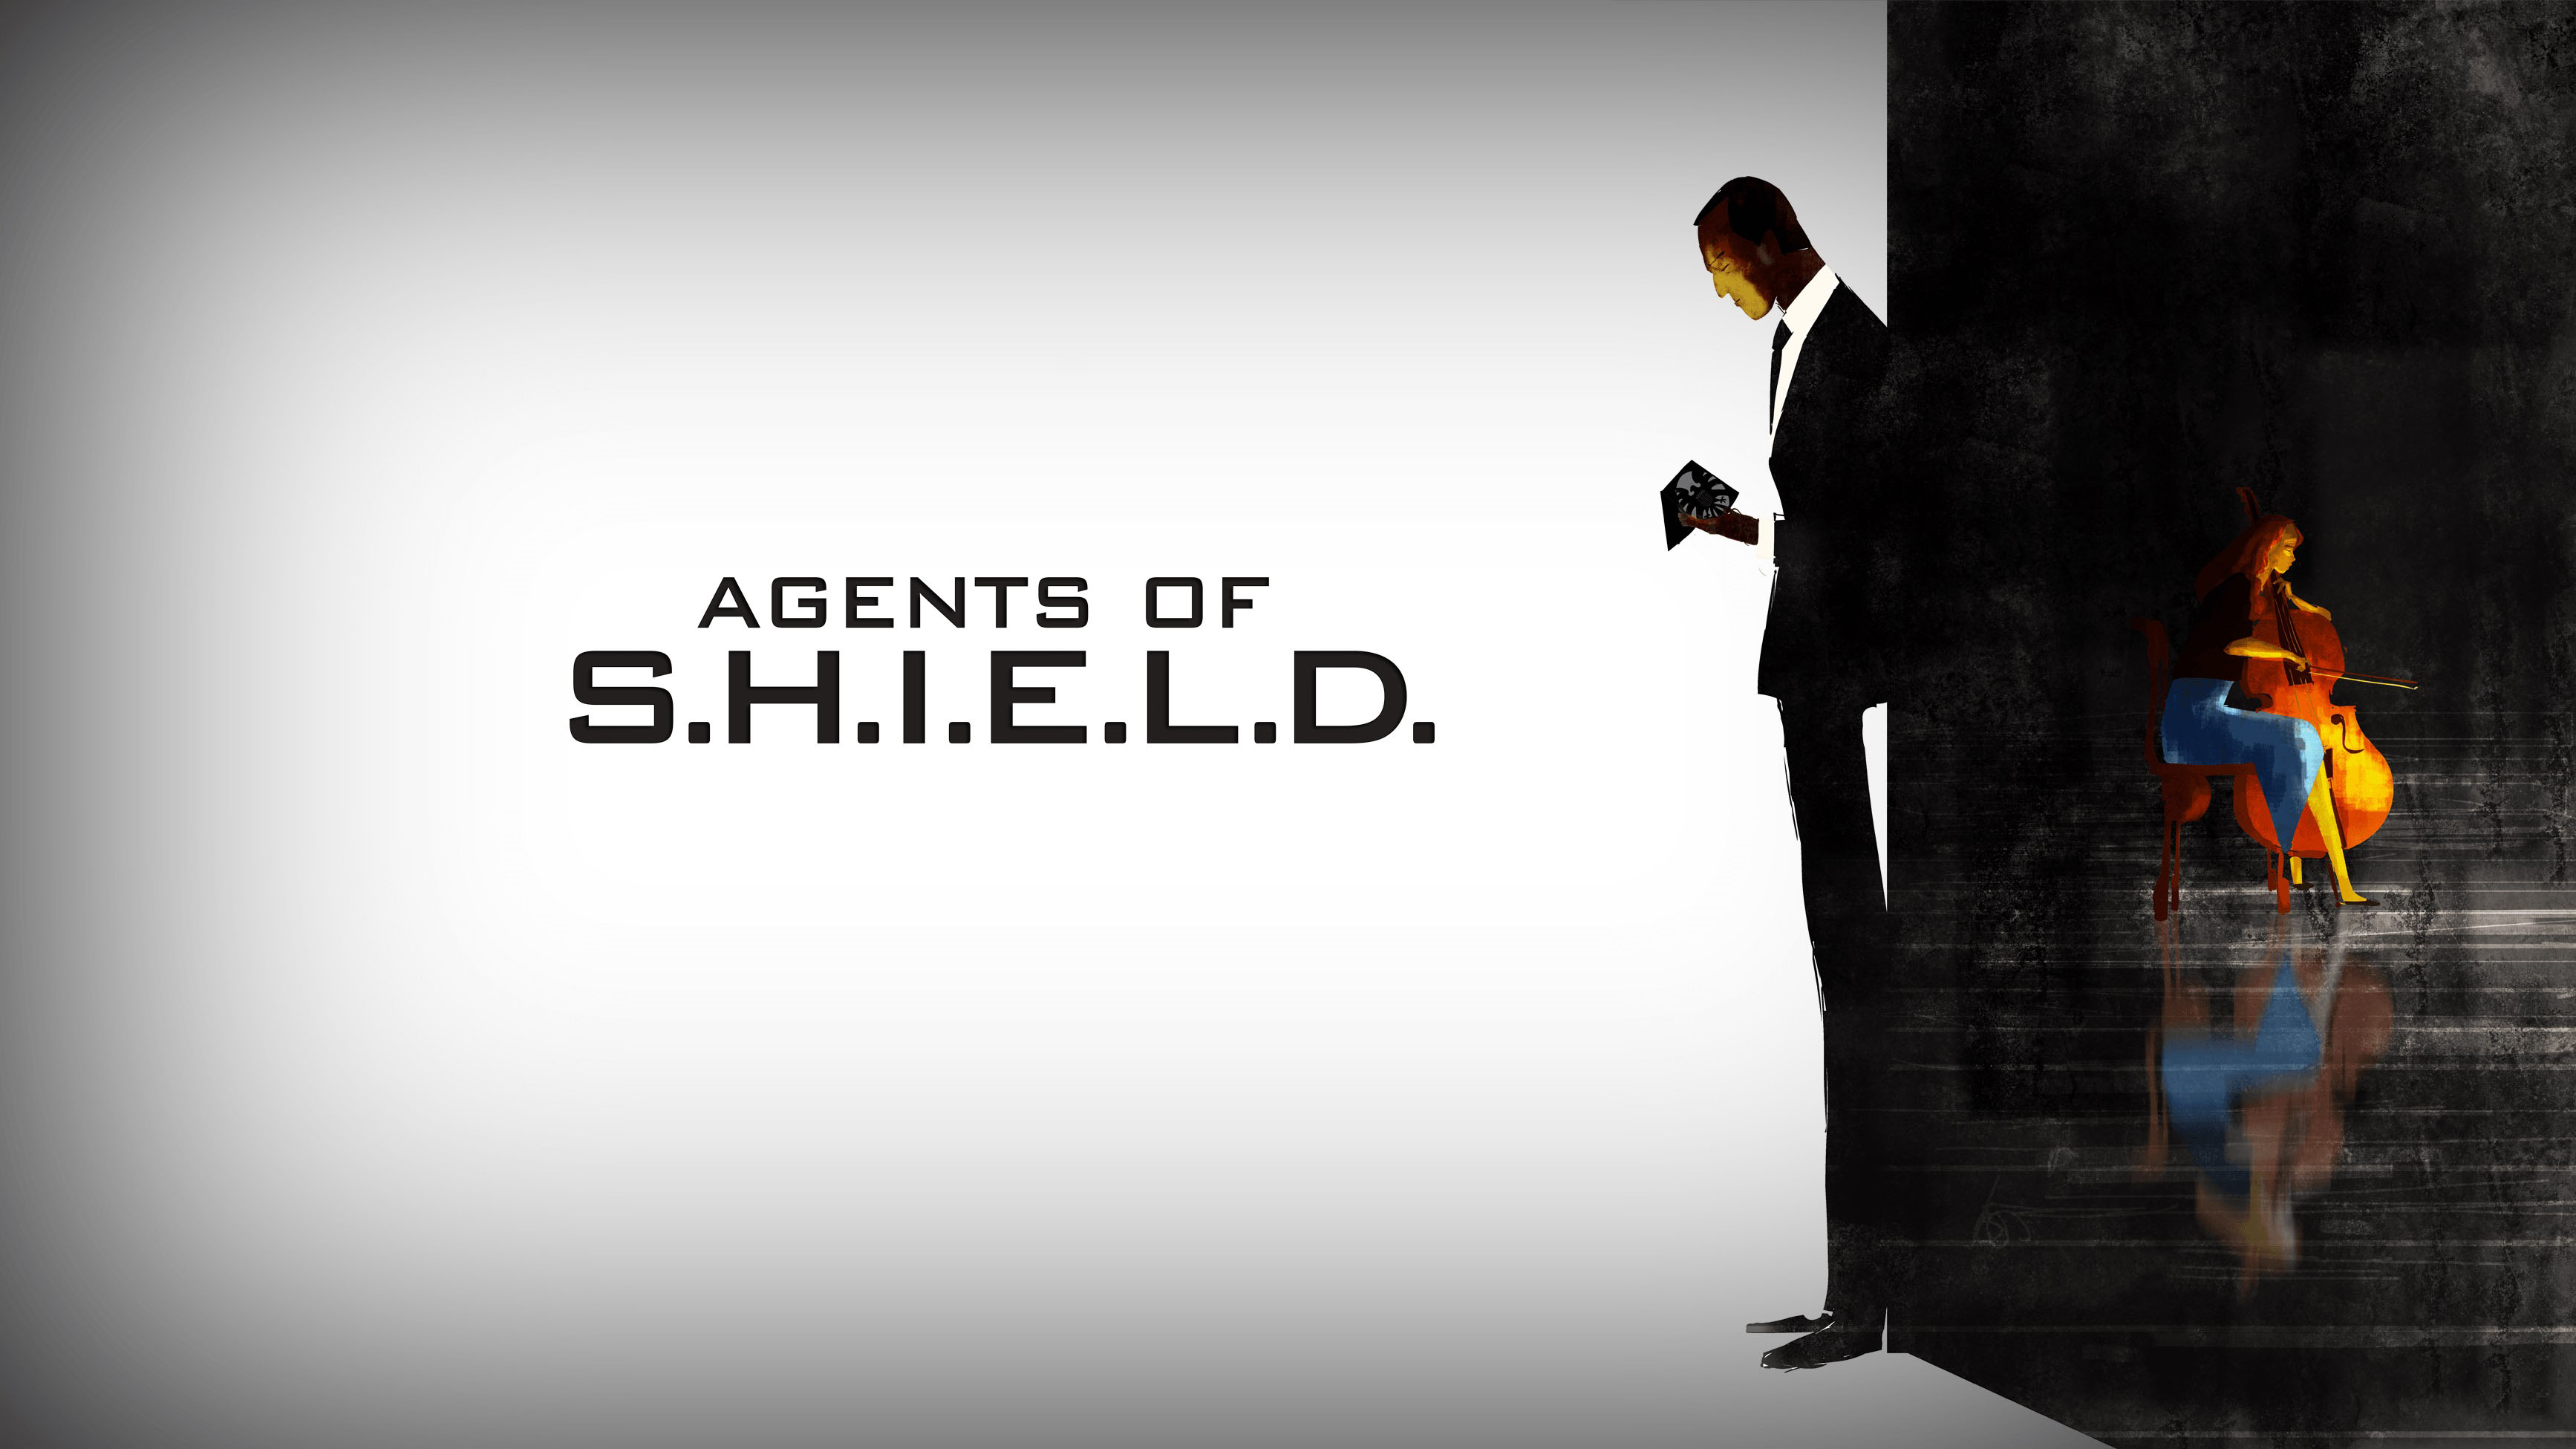 Agents of SHIELD wallpapers HD free Download for Desktop